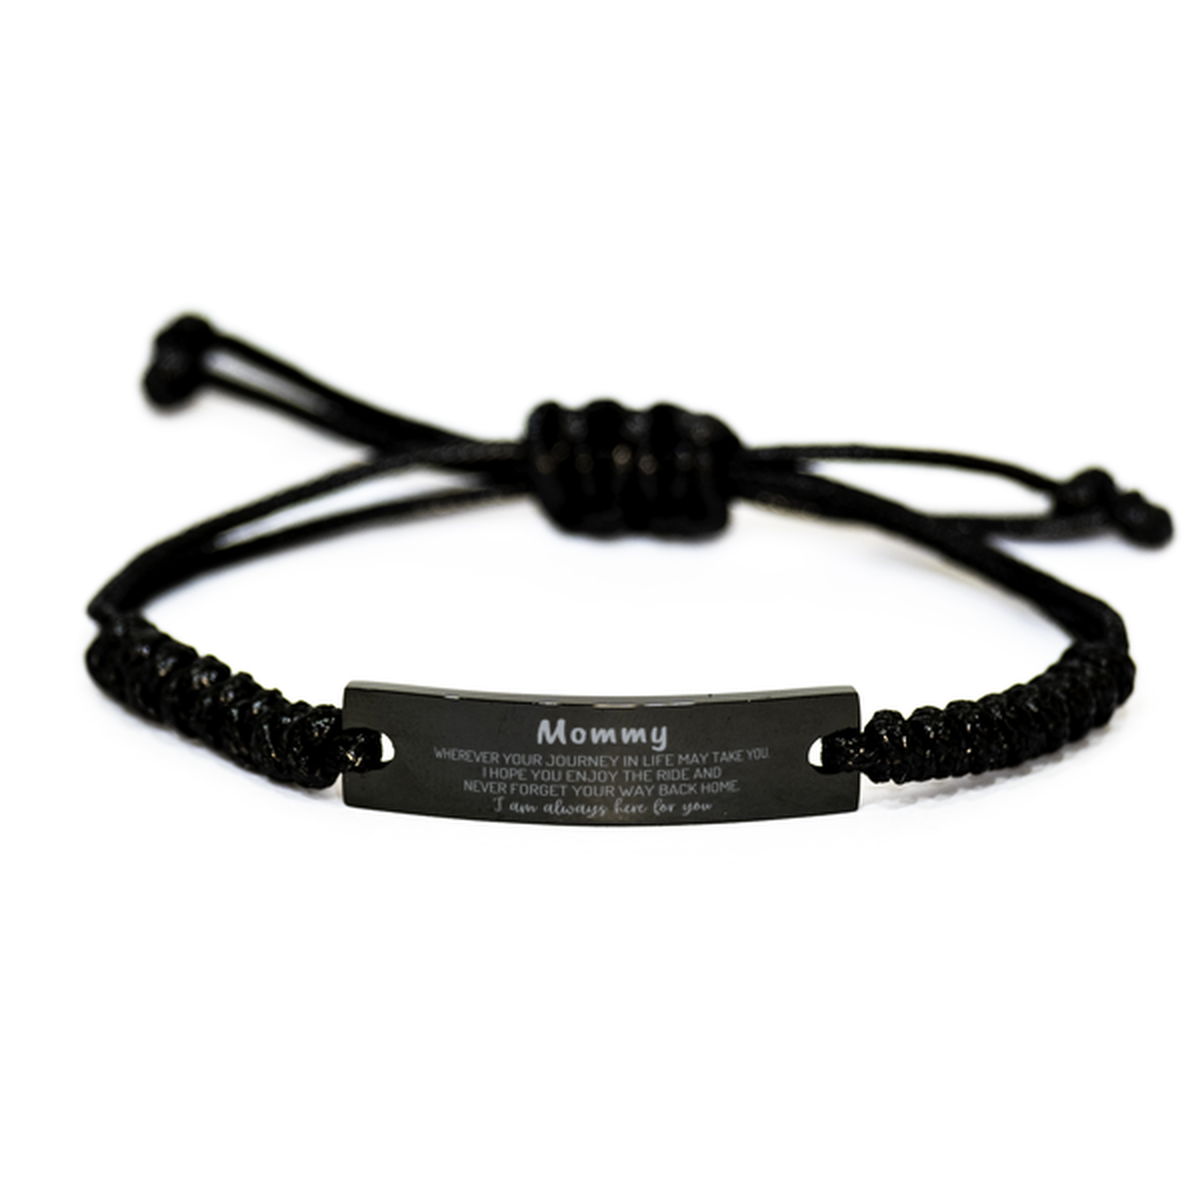 Mommy wherever your journey in life may take you, I am always here for you Mommy Black Rope Bracelet, Awesome Christmas Gifts For Mommy, Mommy Birthday Gifts for Men Women Family Loved One